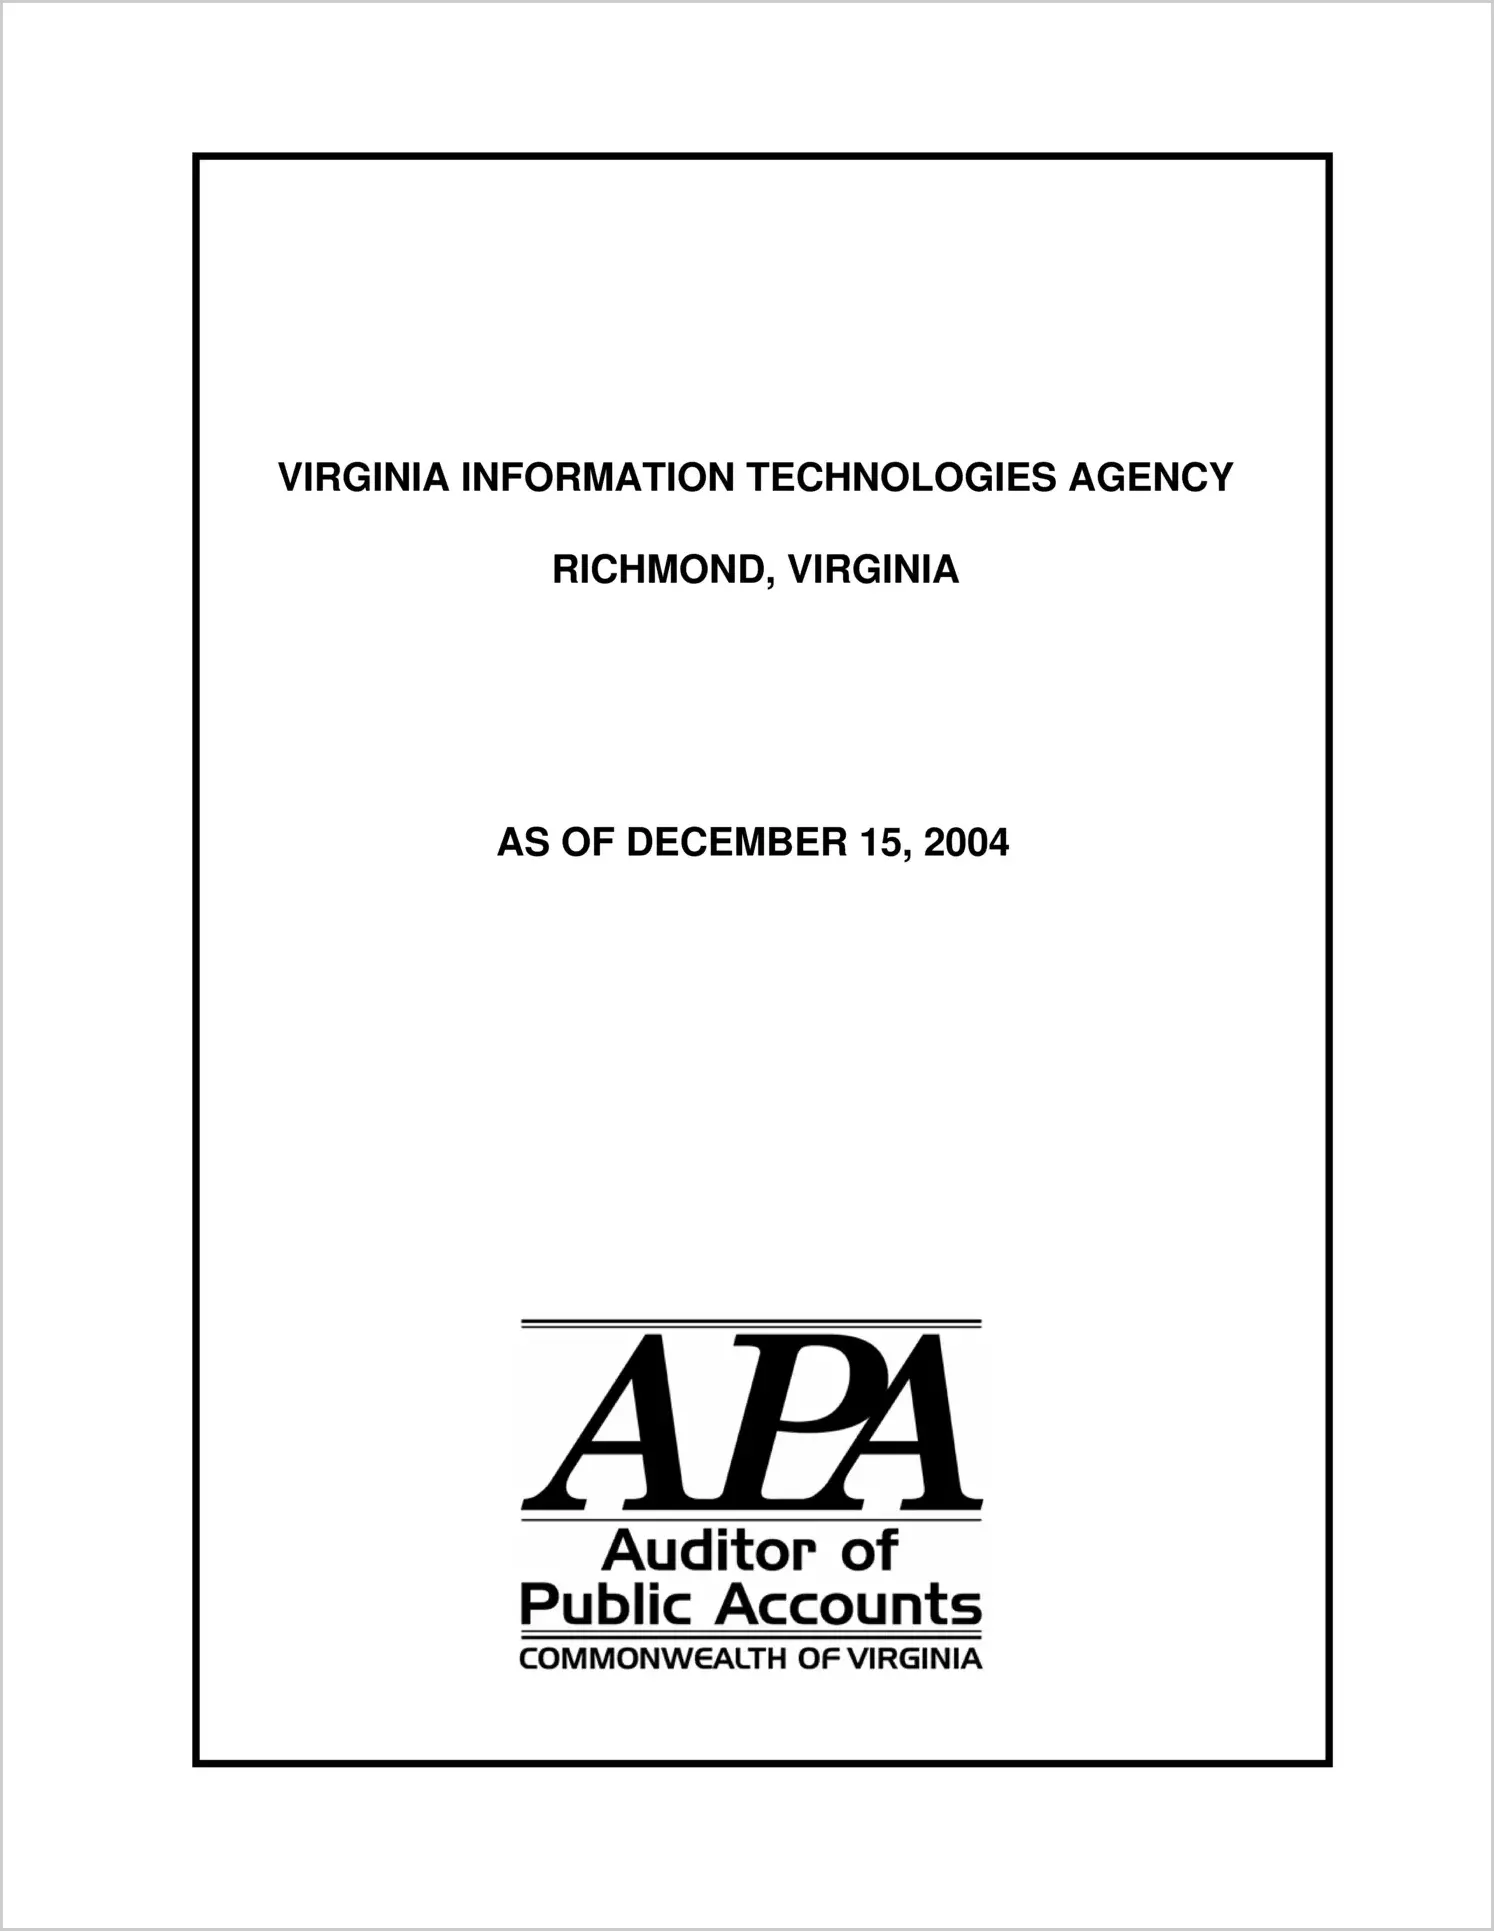 Special Report Virginia Information Technologies Agency as of December 15, 2004